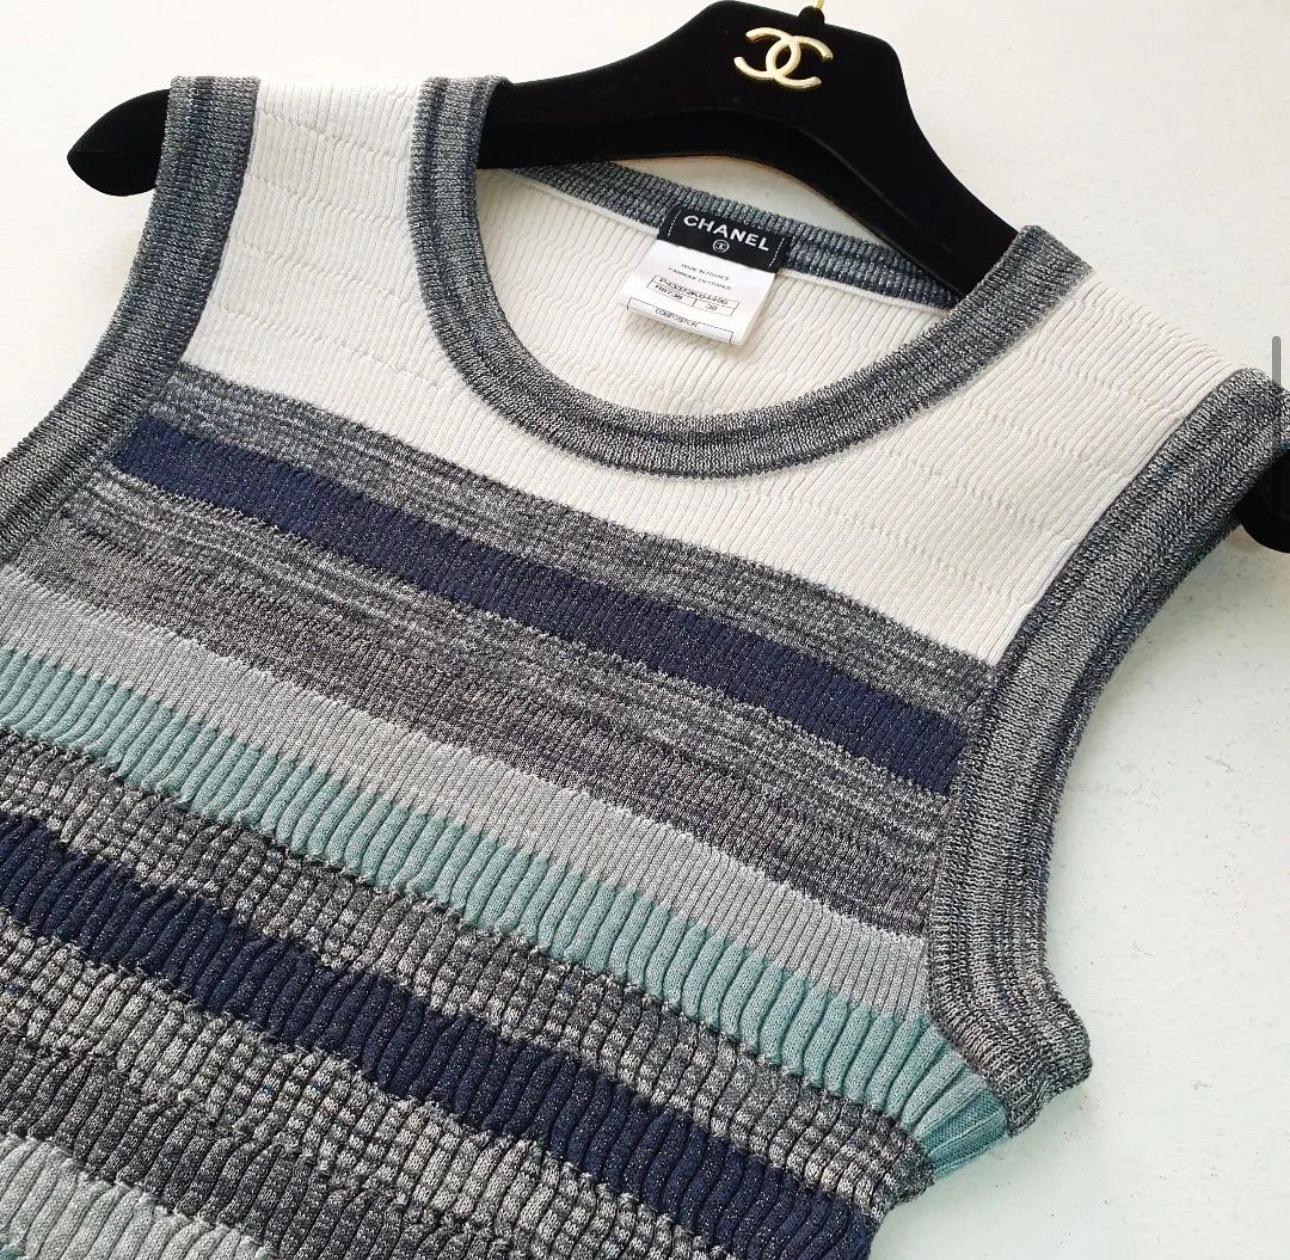 Chanel gradient blue tank top. Shades of grey, blue, silver and navy in a stripe pattern. Stretchy material. 

Designer size 38.

Fabric: 57% Cotton, 20% Viscose, 14% Nylon, 7% Polyester, 2% Cashmere

Very good condition